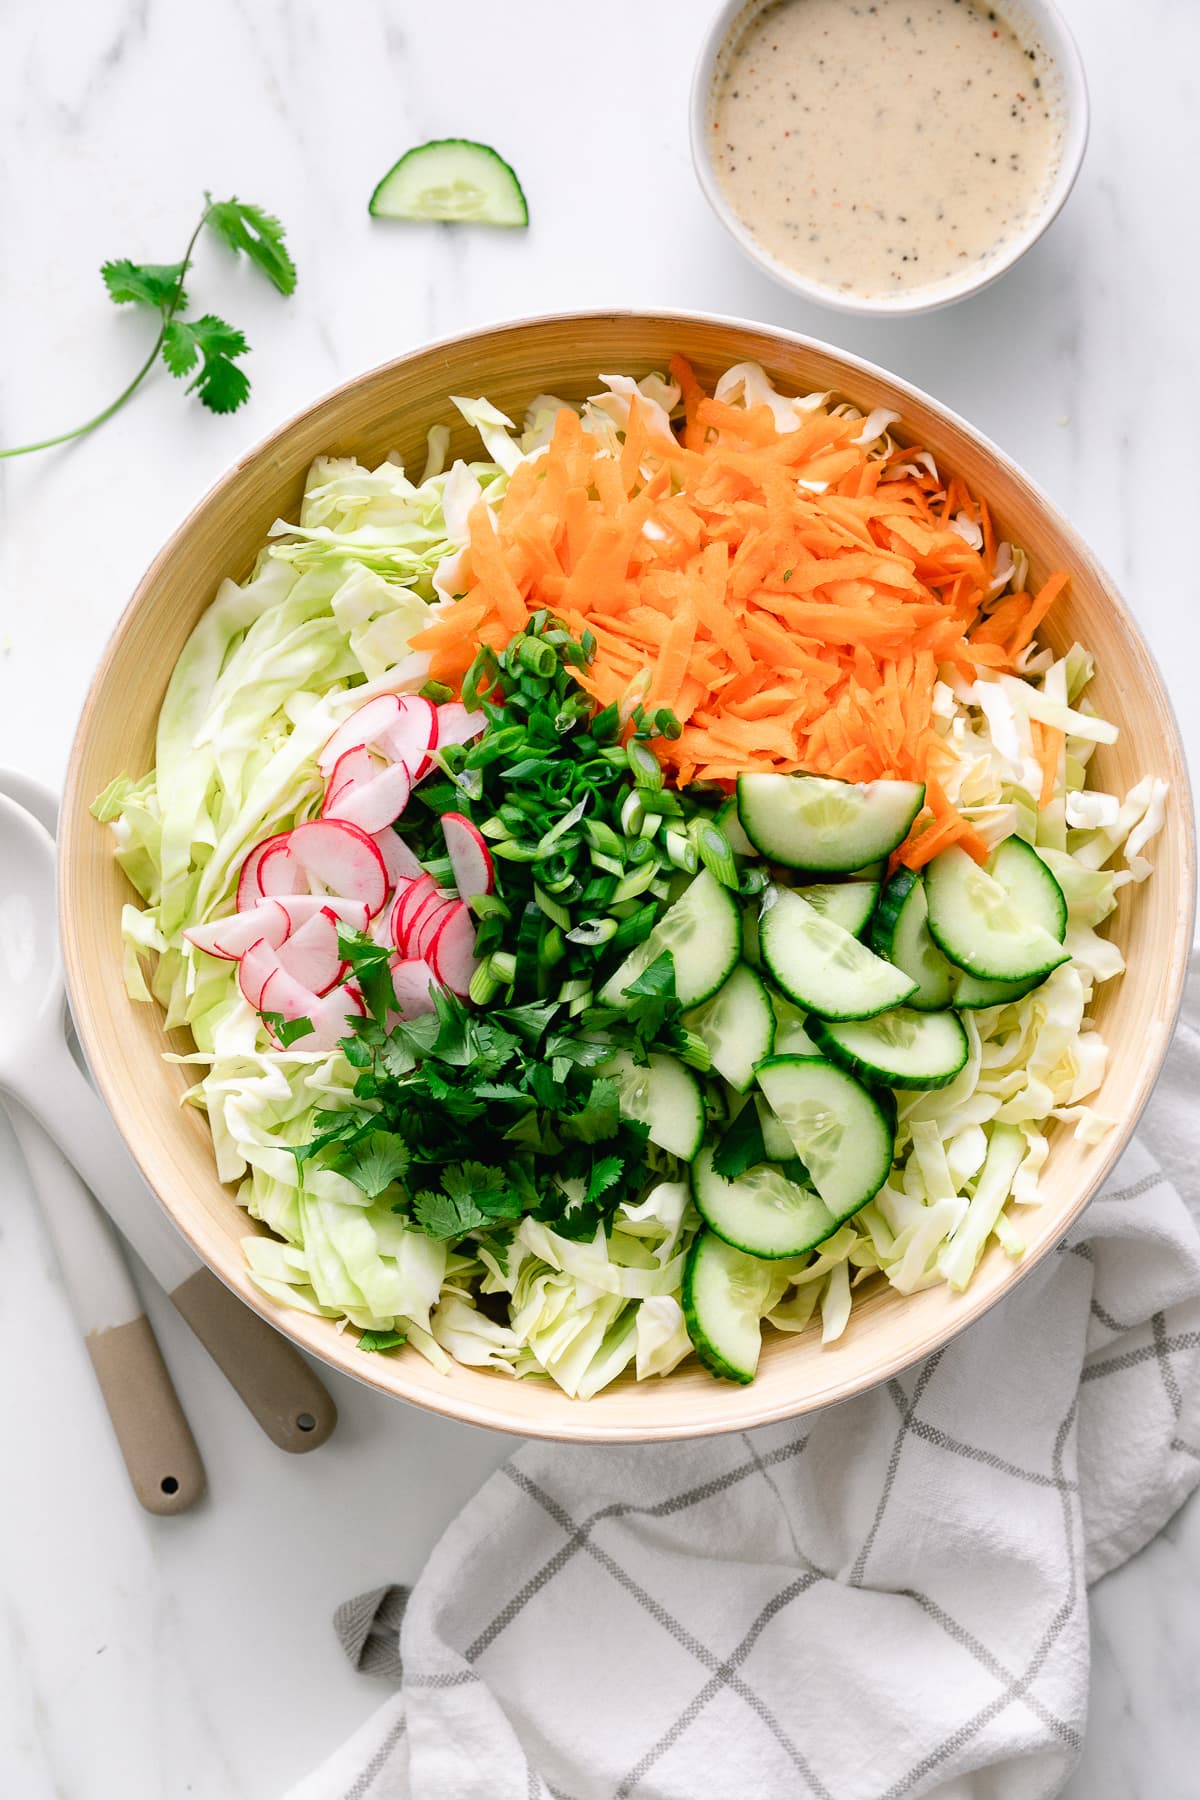 top down view of cabbage salad ingredients in large bowl with dressing on the side.